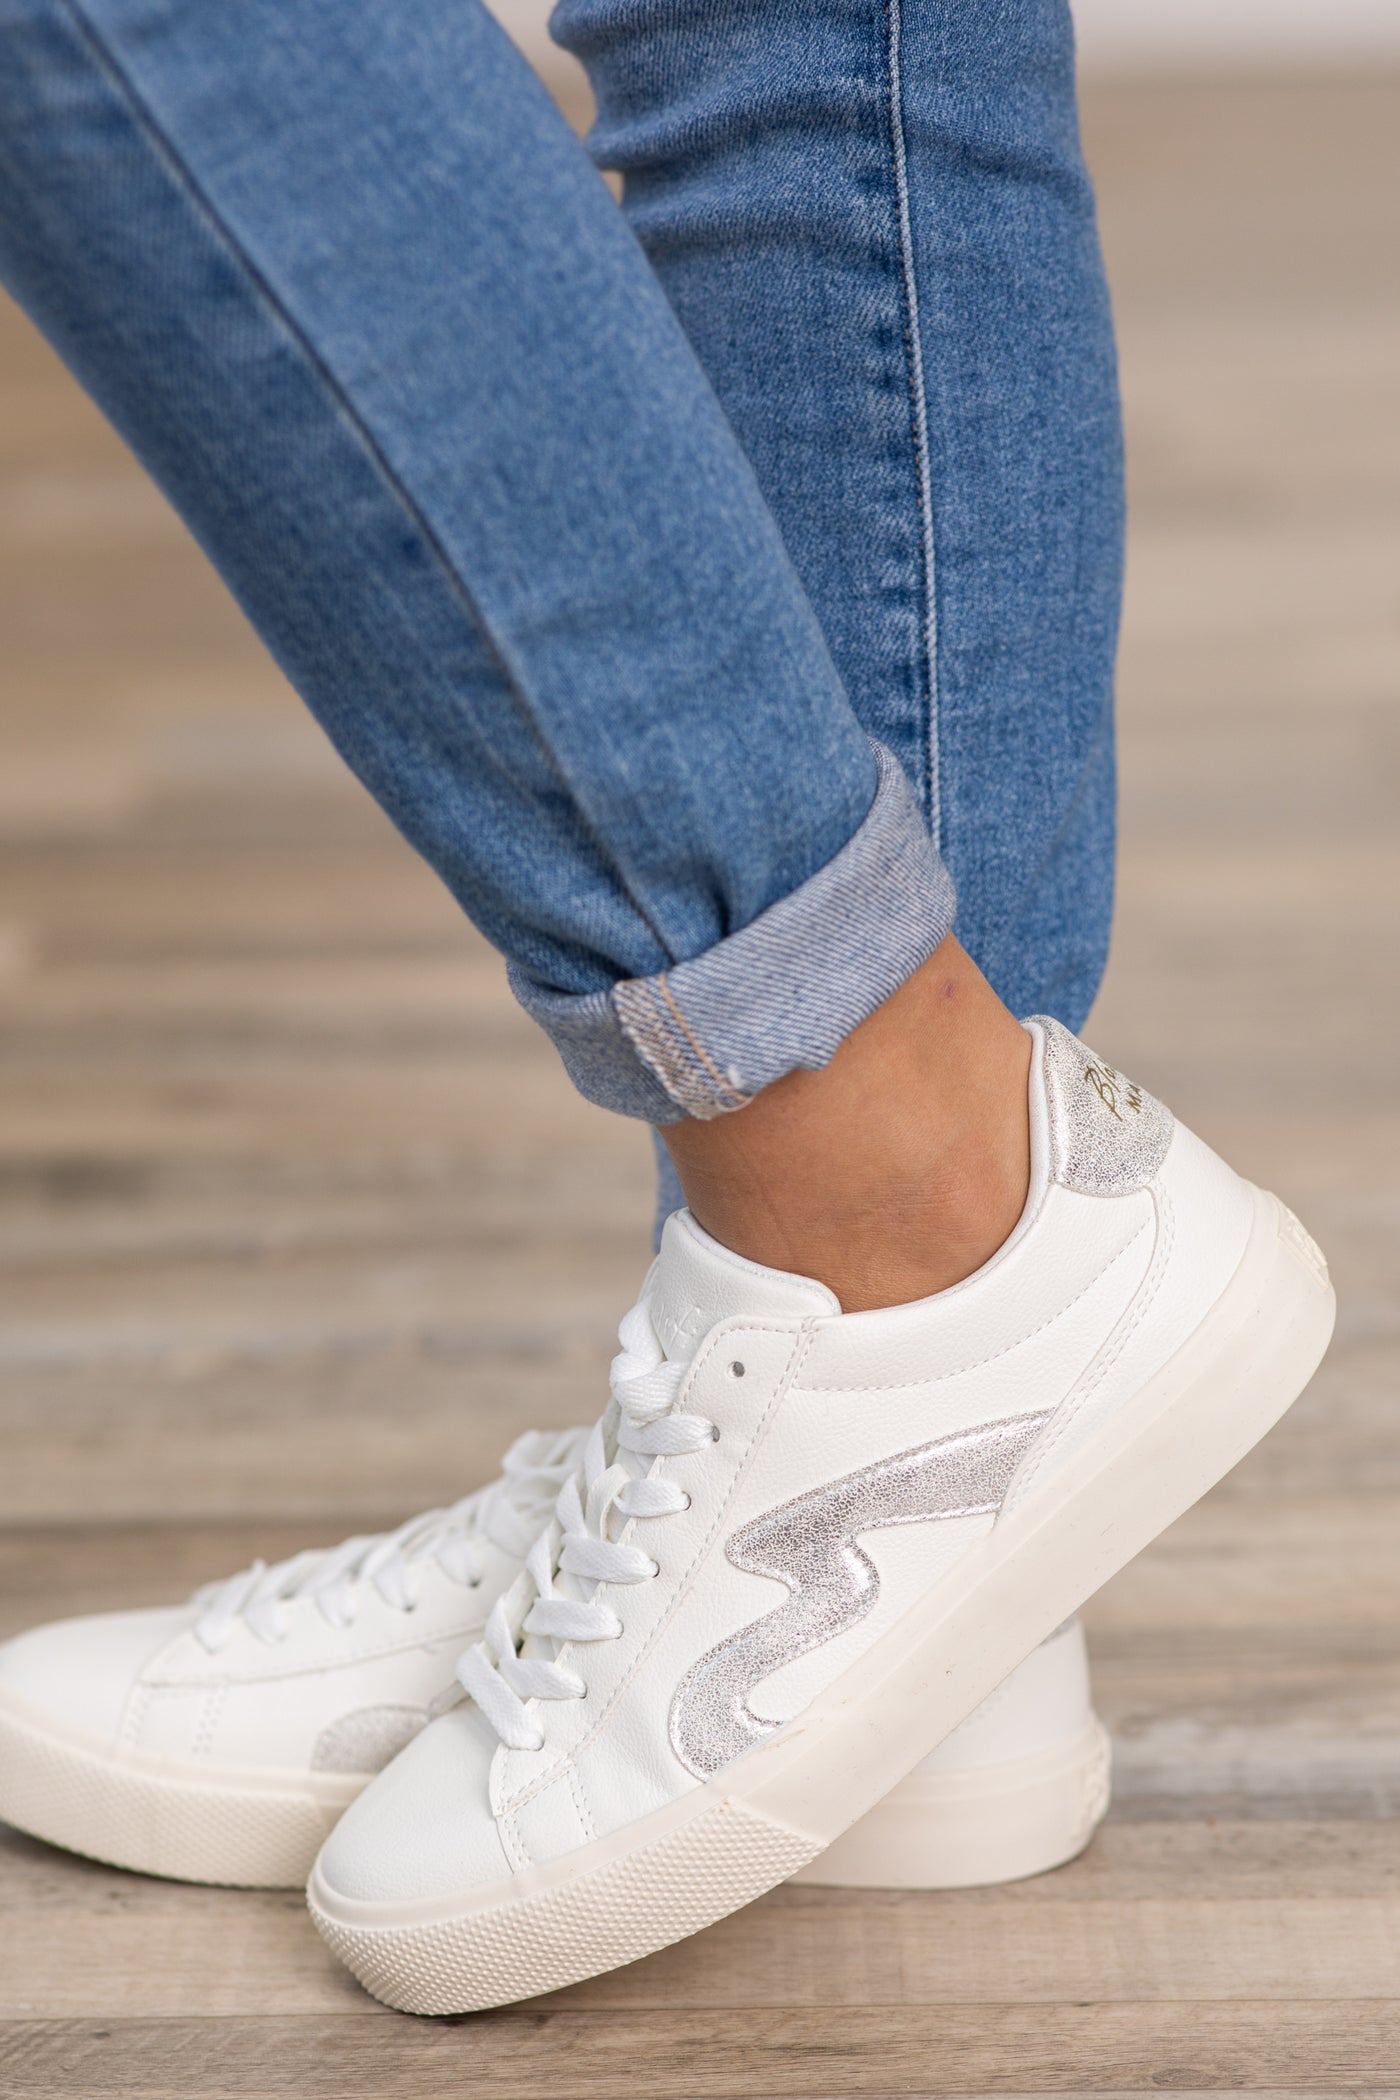 White Sneakers With Silver Swoosh Detail